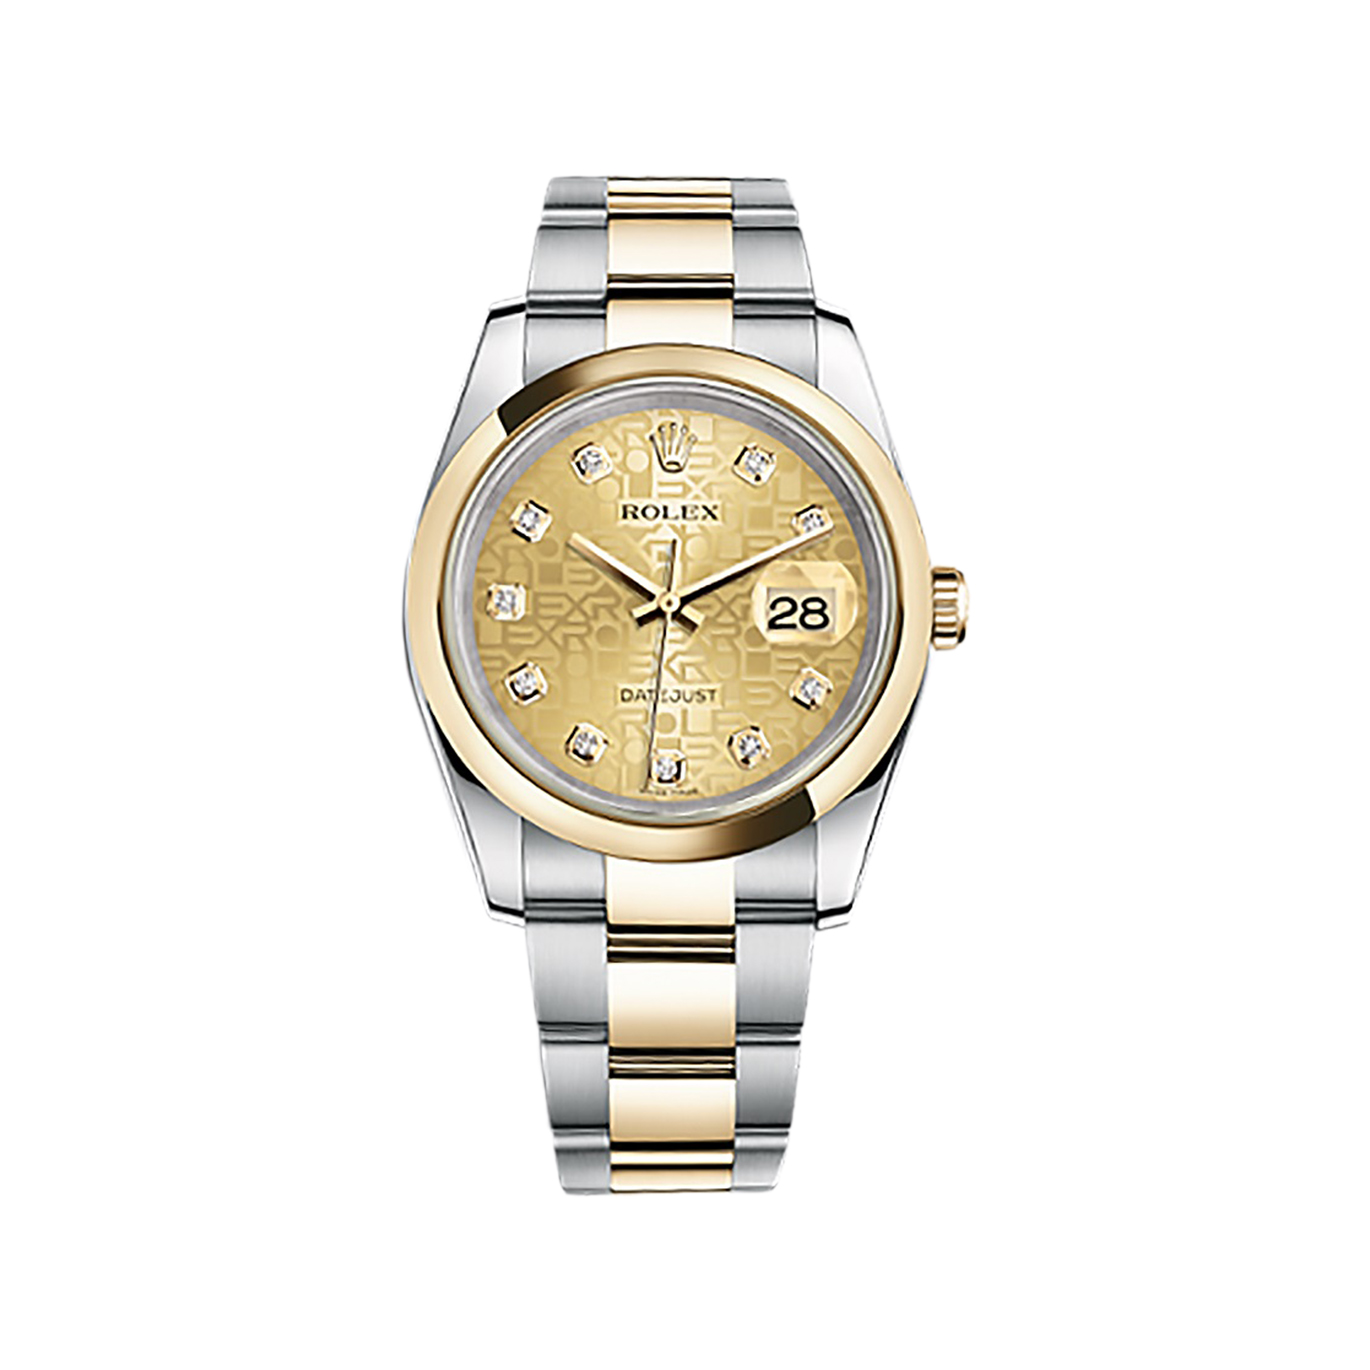 Datejust 36 116203 Gold & Stainless Steel Watch (Champagne Jubilee Design Set with Diamonds) - Click Image to Close